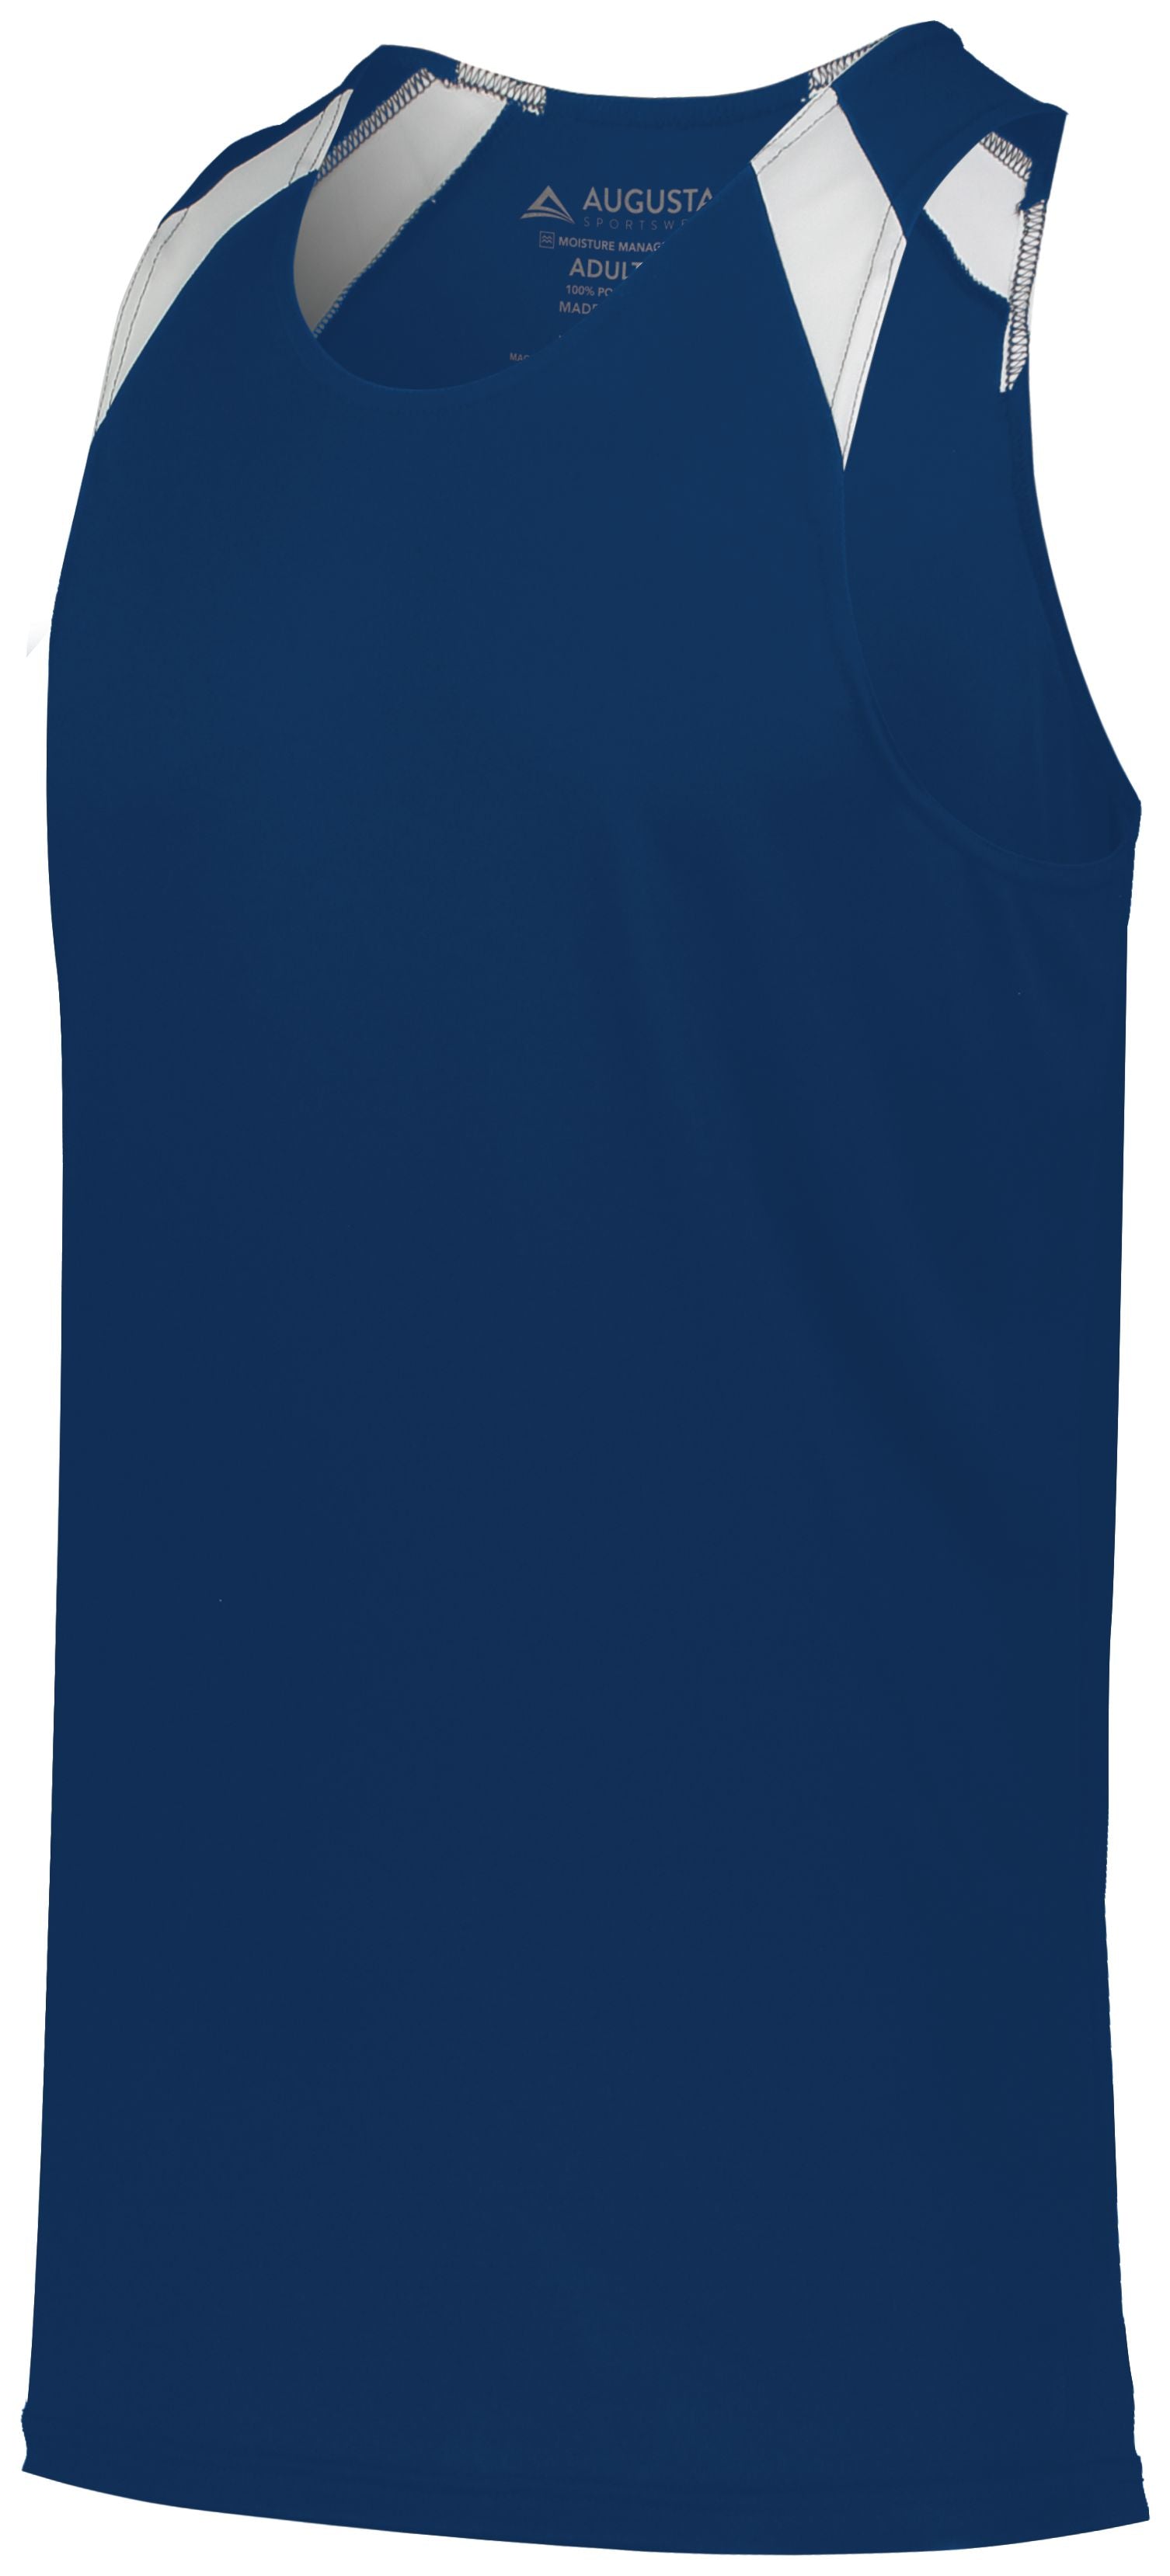 Augusta Sportswear Overspeed Track Jersey in Navy/White  -Part of the Adult, Adult-Jersey, Augusta-Products, Track-Field, Shirts product lines at KanaleyCreations.com